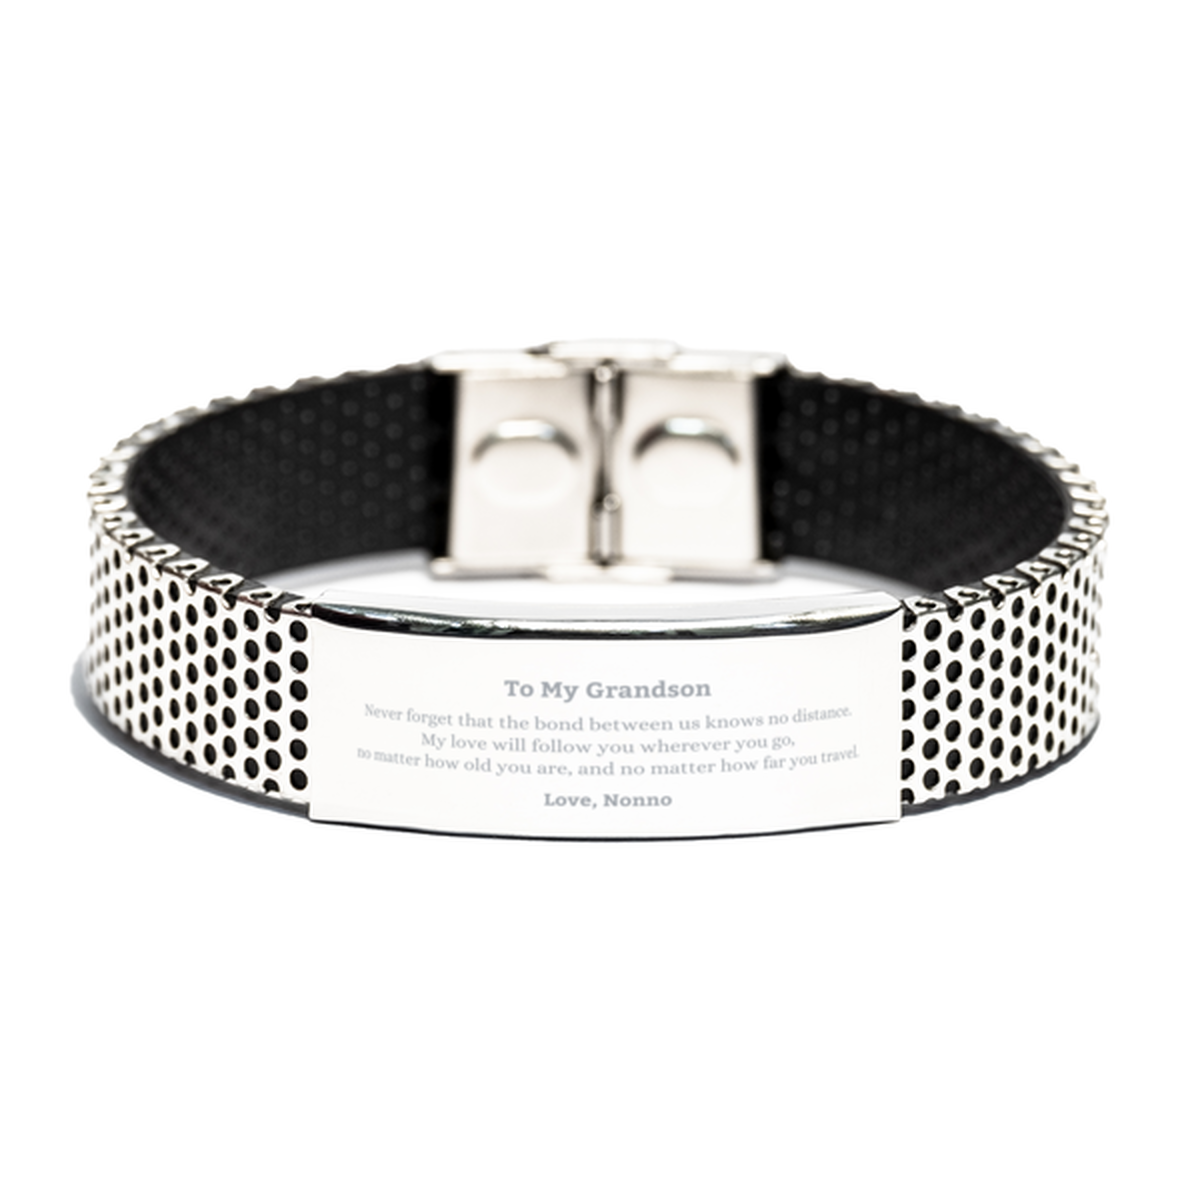 Grandson Birthday Gifts from Nonno, Adjustable Stainless Steel Bracelet for Grandson Christmas Graduation Unique Gifts Grandson Never forget that the bond between us knows no distance. Love, Nonno